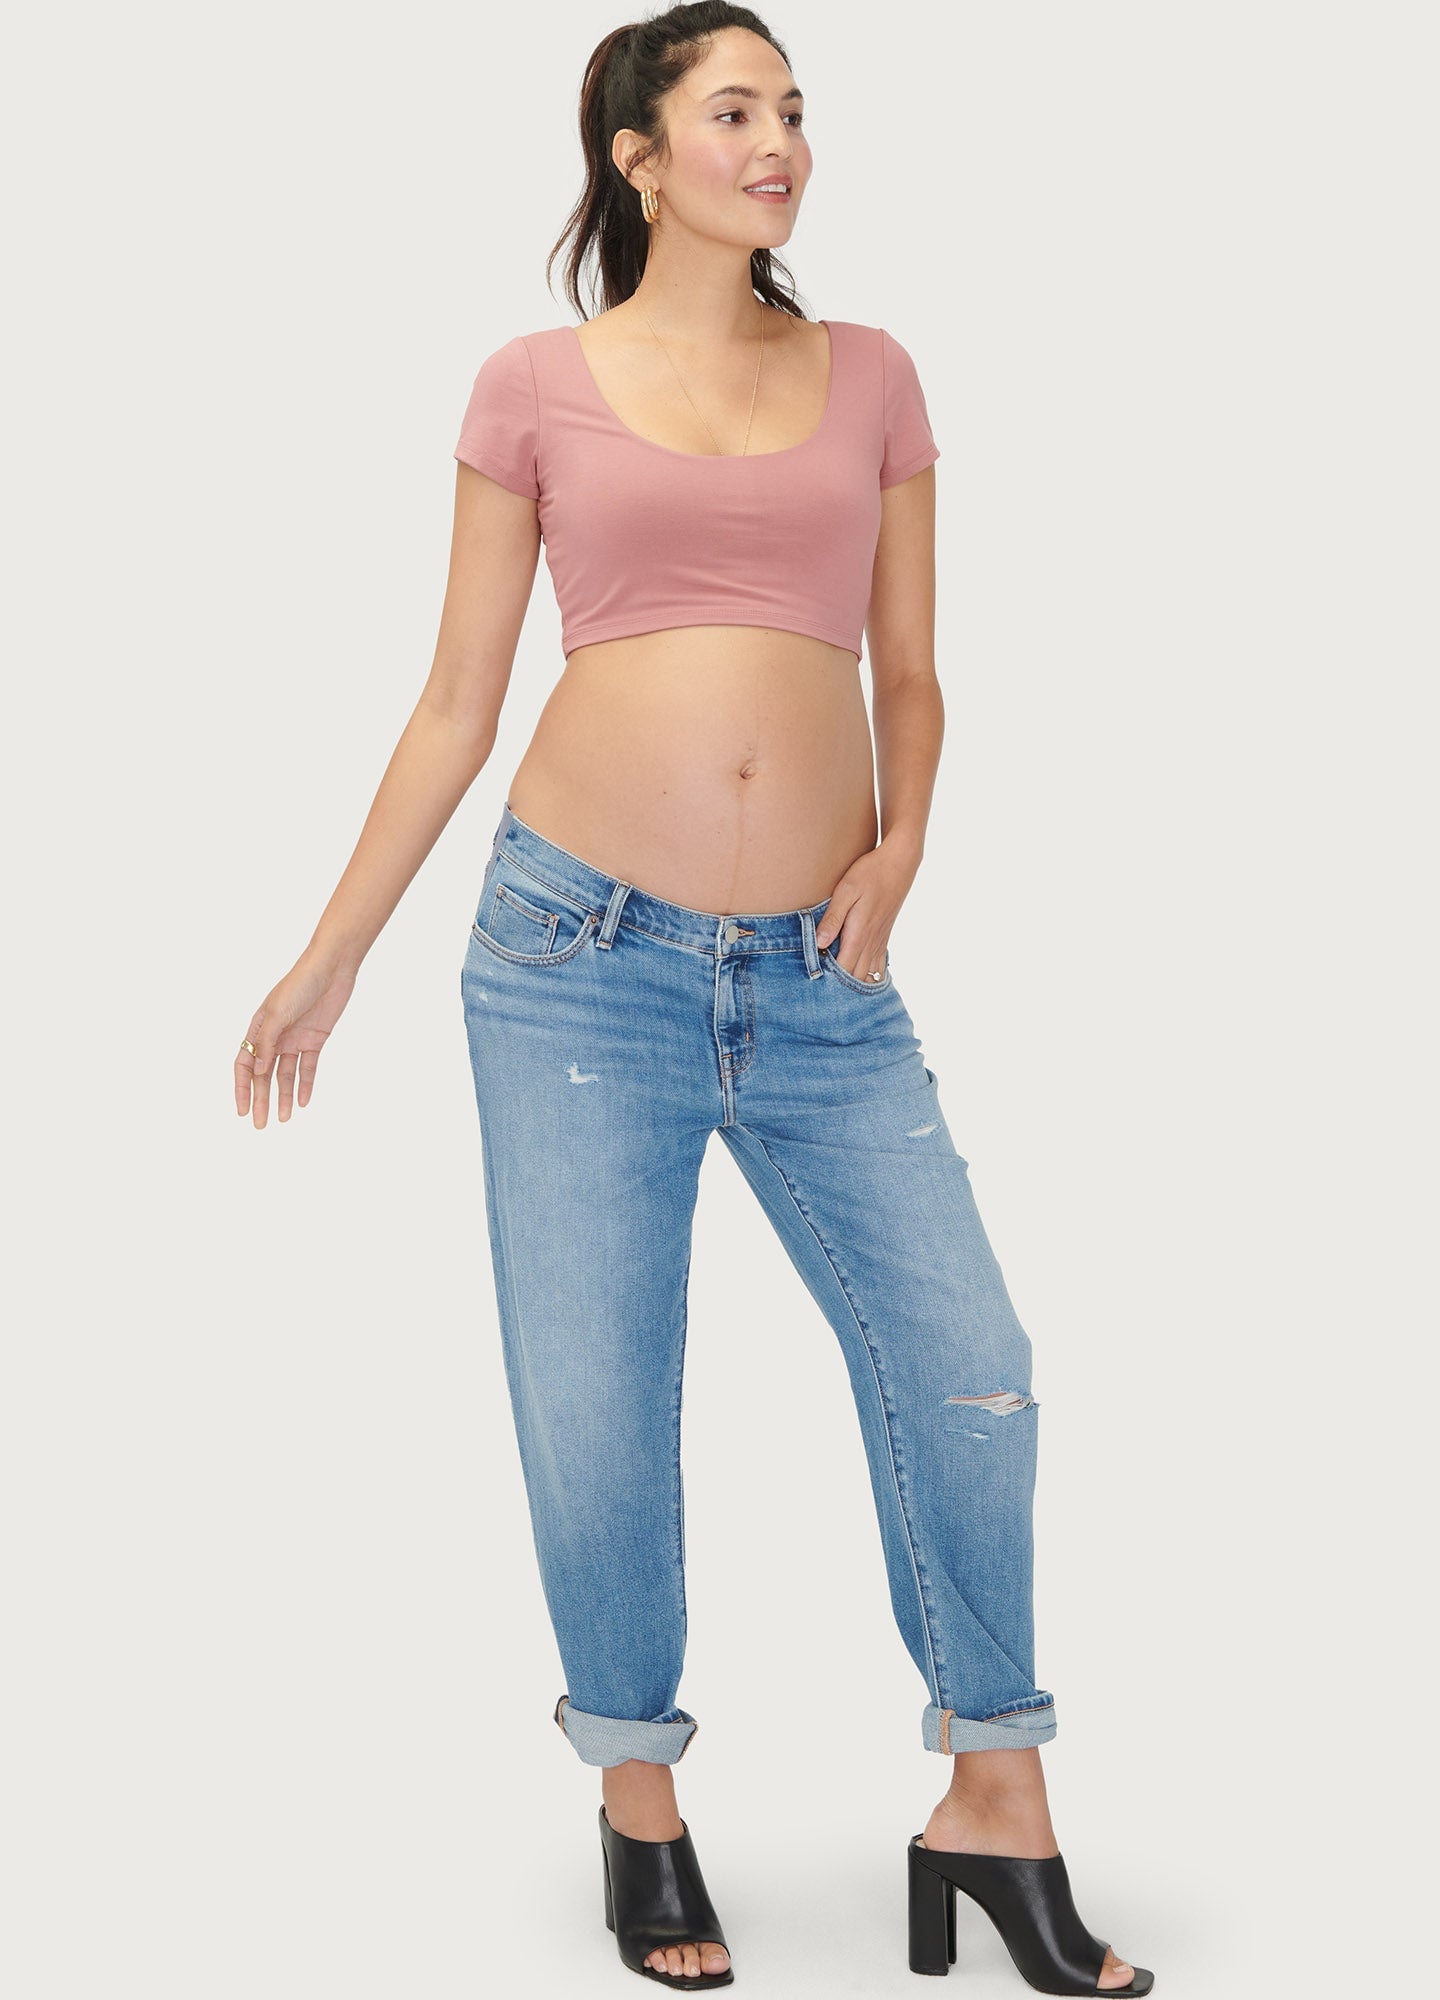 Loose Jeans: The Boyfriend Maternity Jean | Meghan Markle's Go-To Maternity Just Relaunched Pregnancy Jeans | Fashion Photo 4